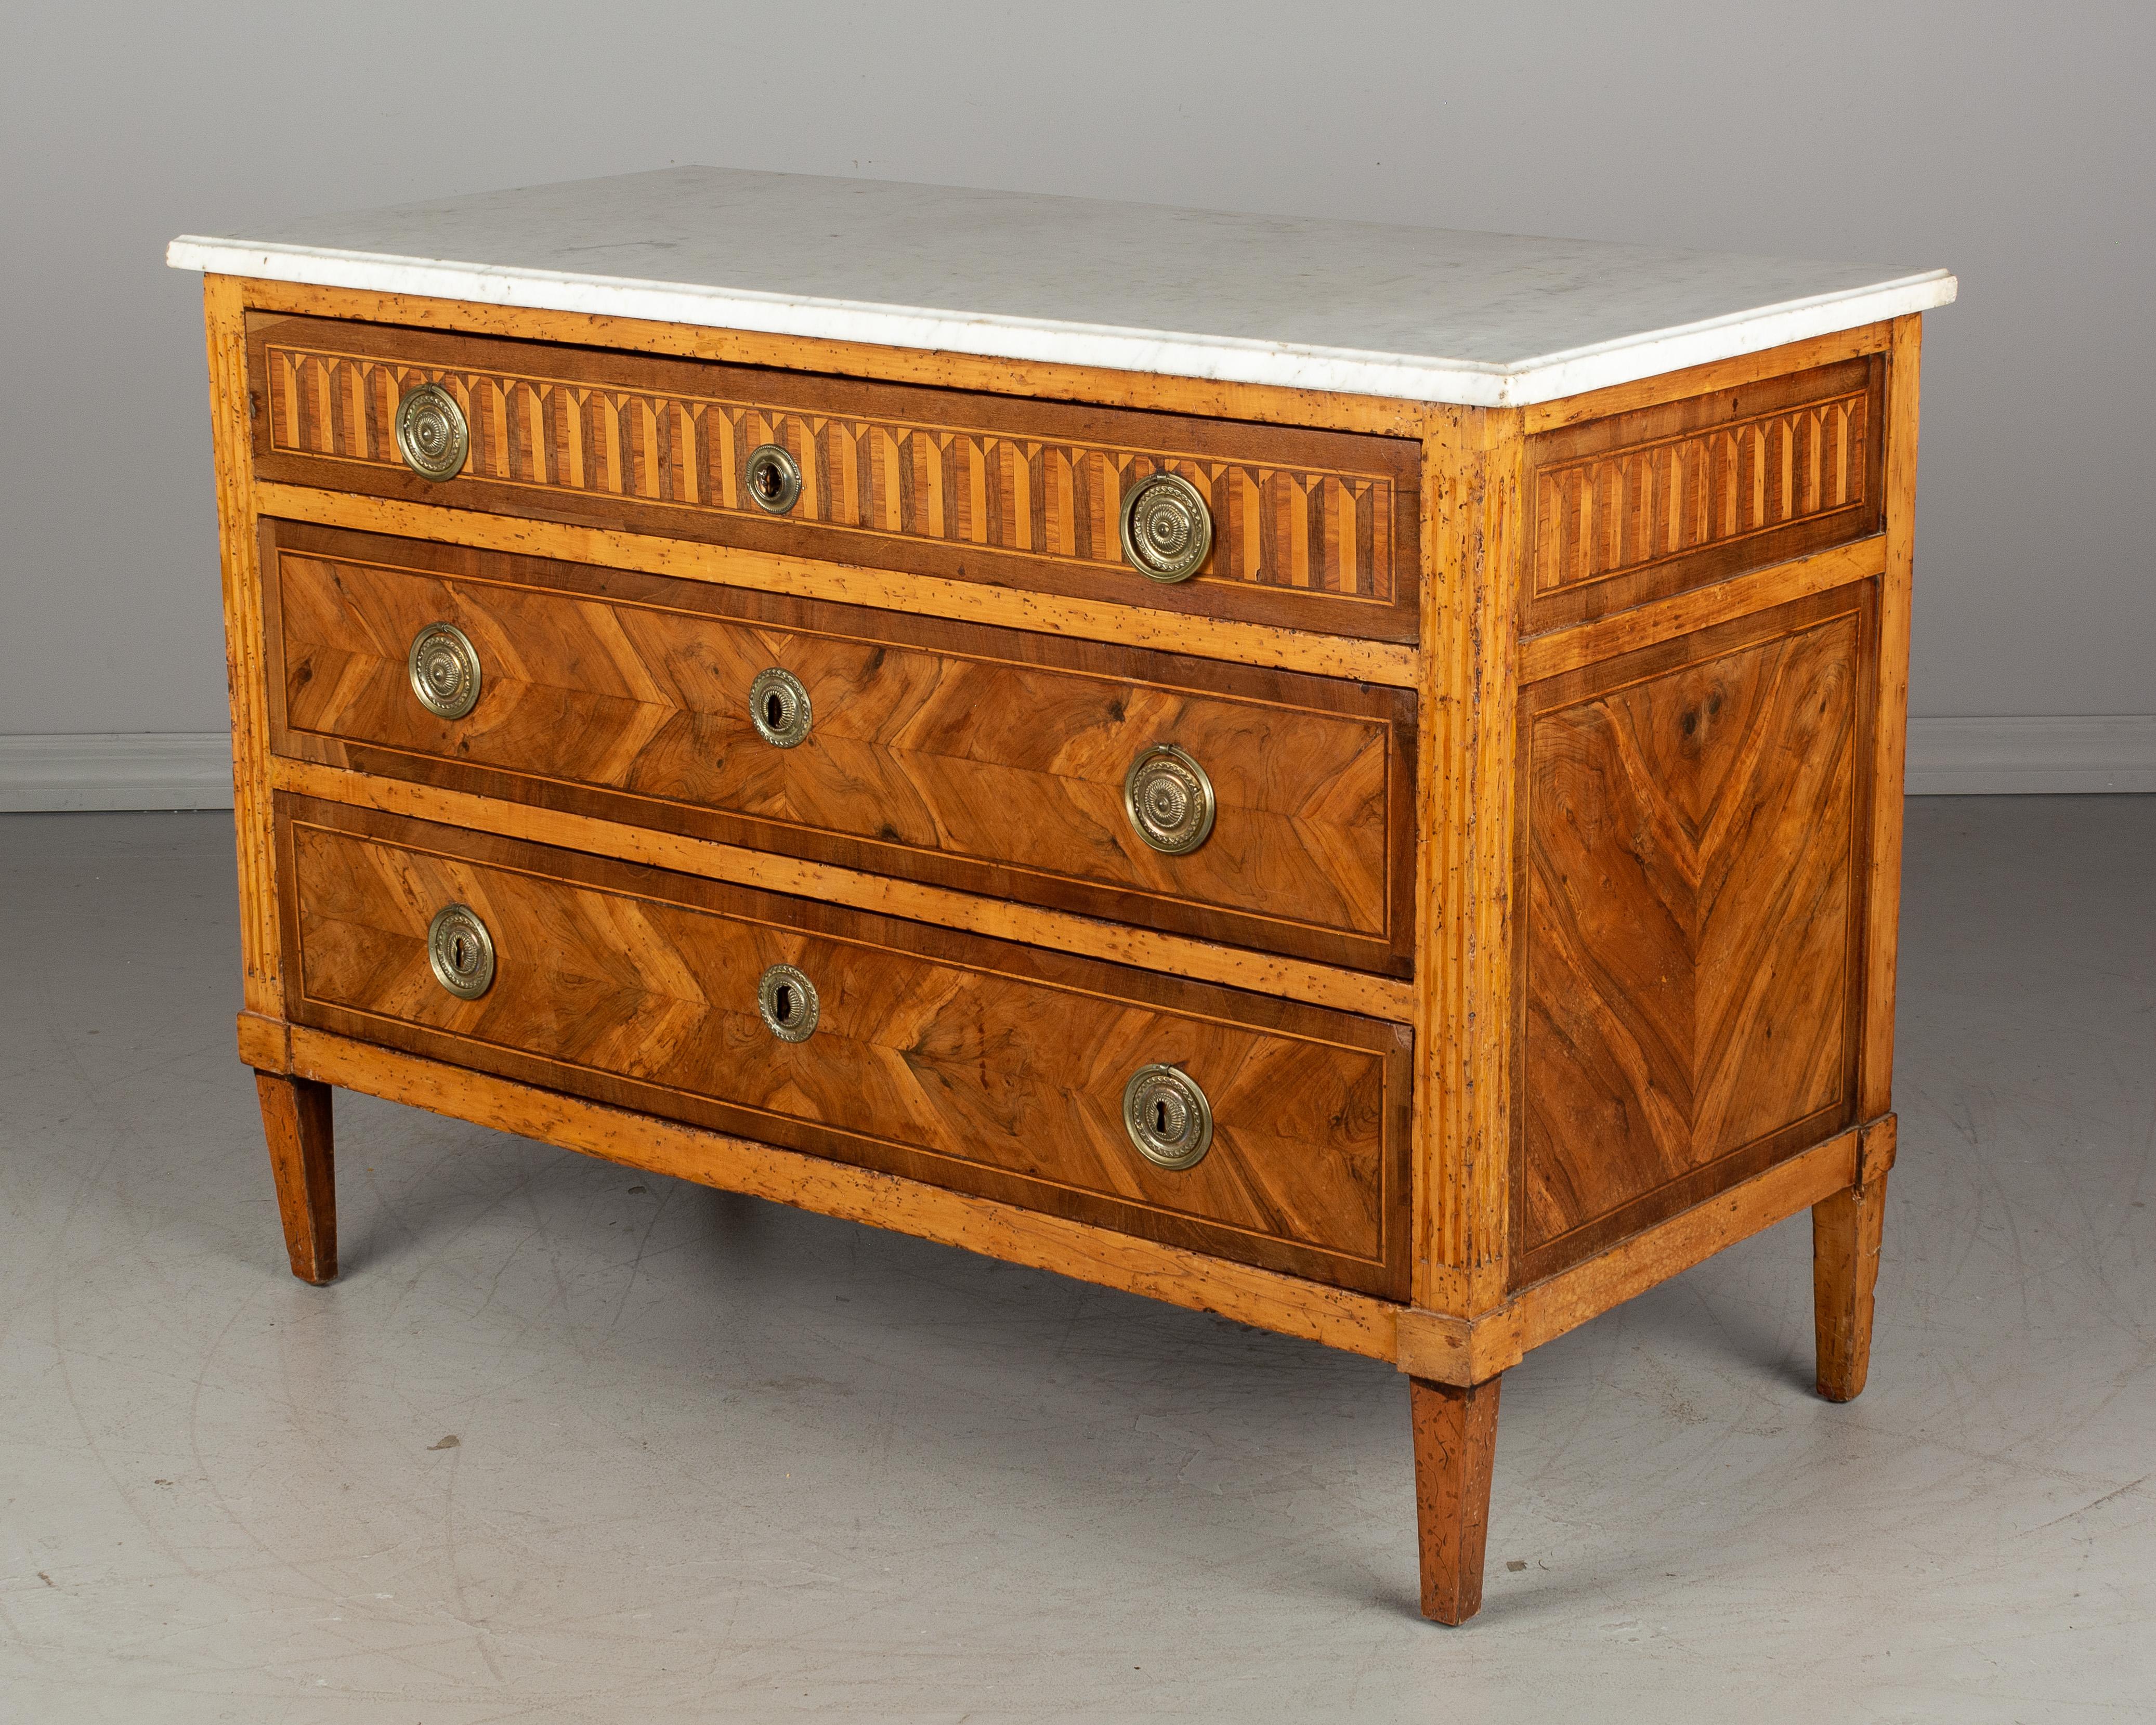 A 19th century French Louis XVI style marquetry commode with three dovetailed drawers and white marble top. Made of solid walnut with bookmatched veneer of walnut and various wood inlay. Original brass hardware. Locks are not present and there are